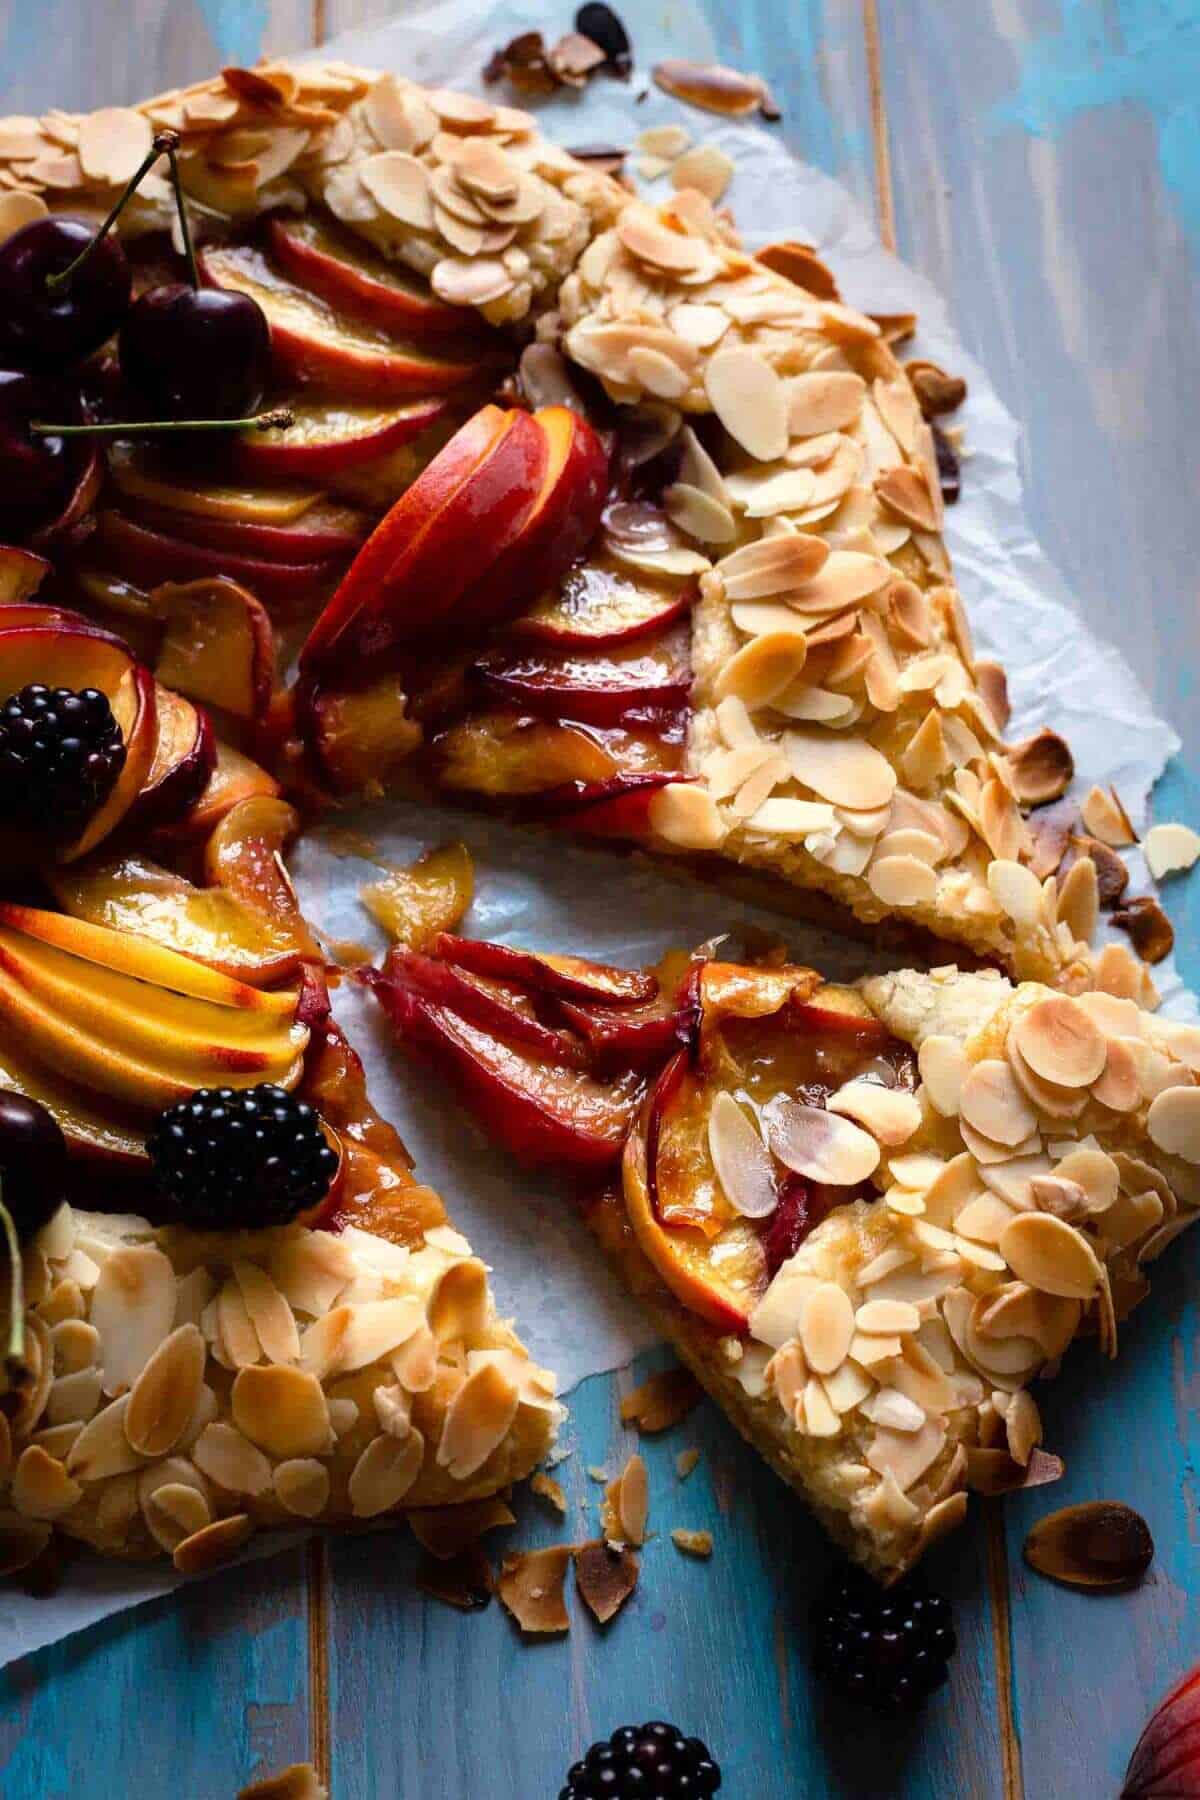 sliced galette filled with peaches and crust covered in toasted almonds